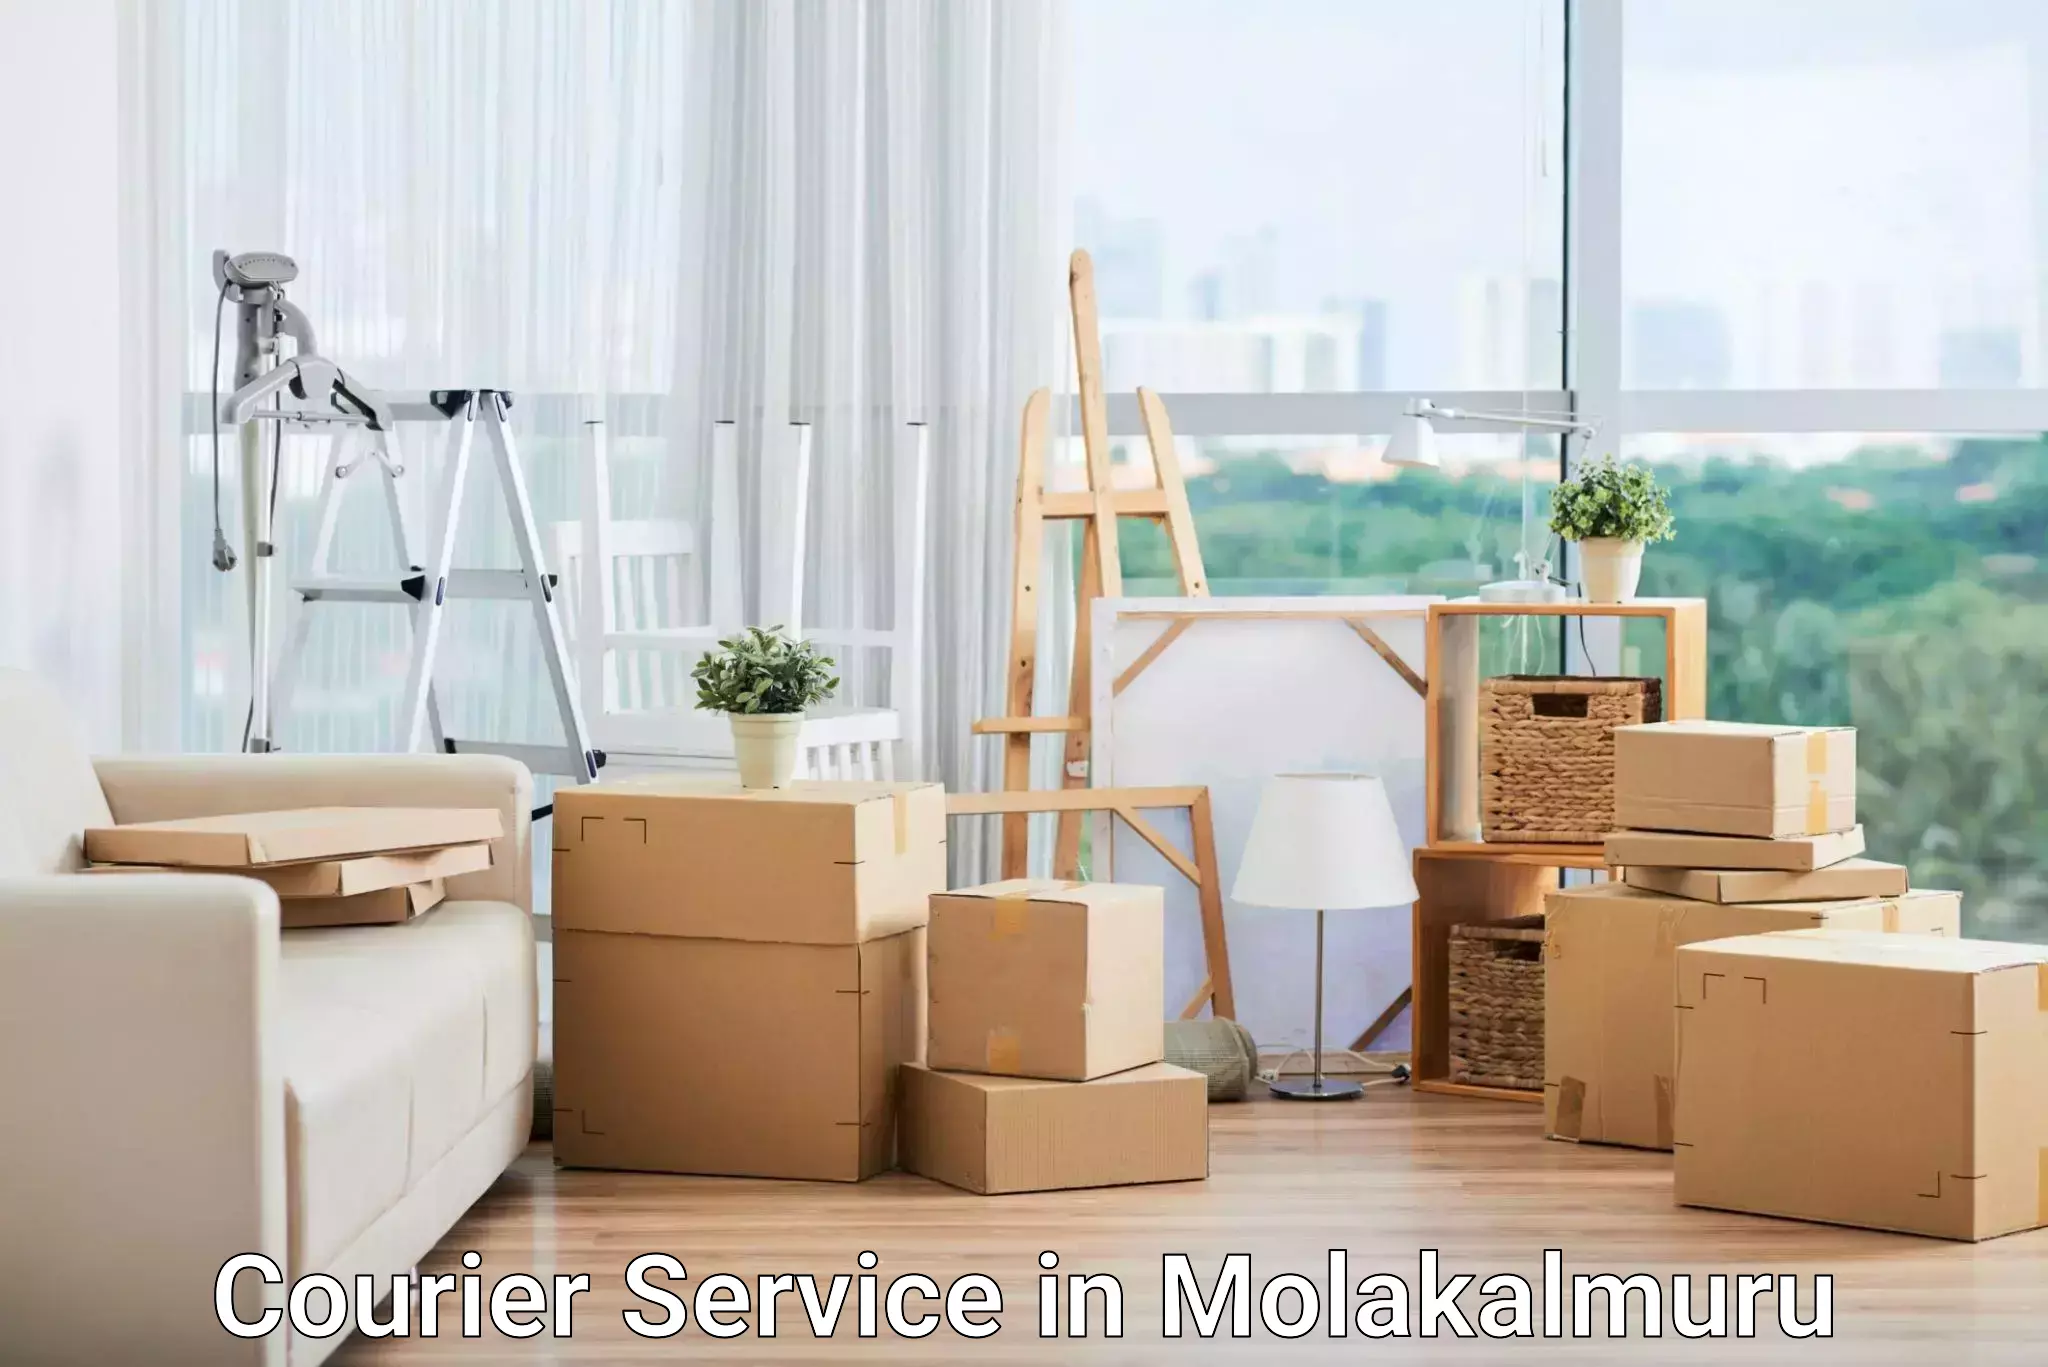 Medical delivery services in Molakalmuru